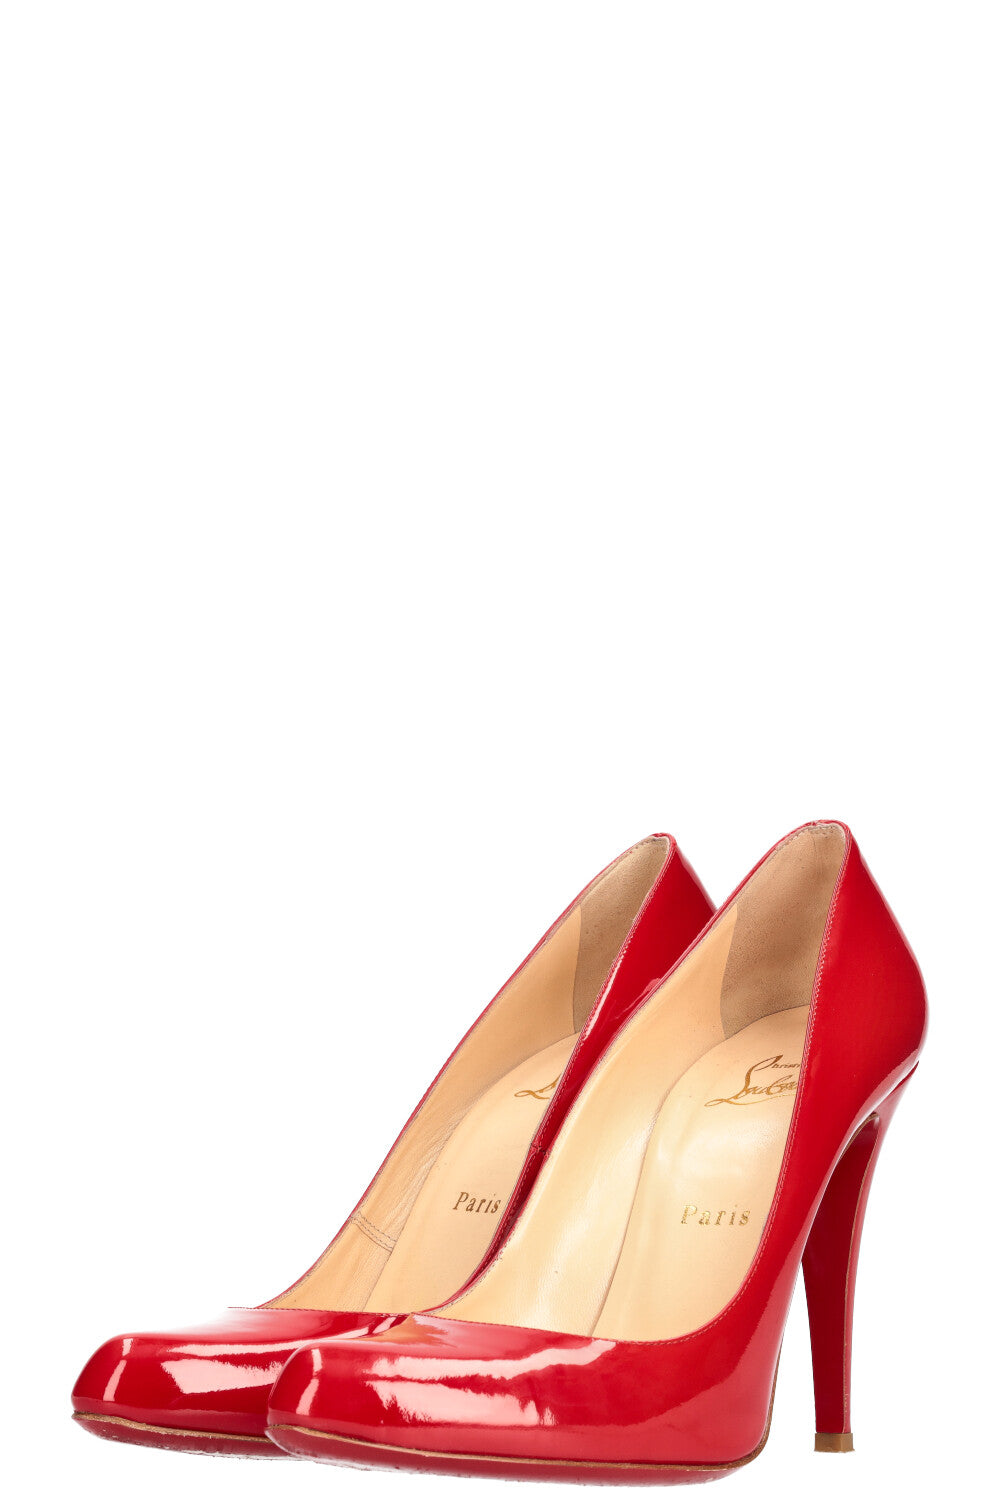 CHRISTIAN LOUBOUTIN High Heels Patent Red